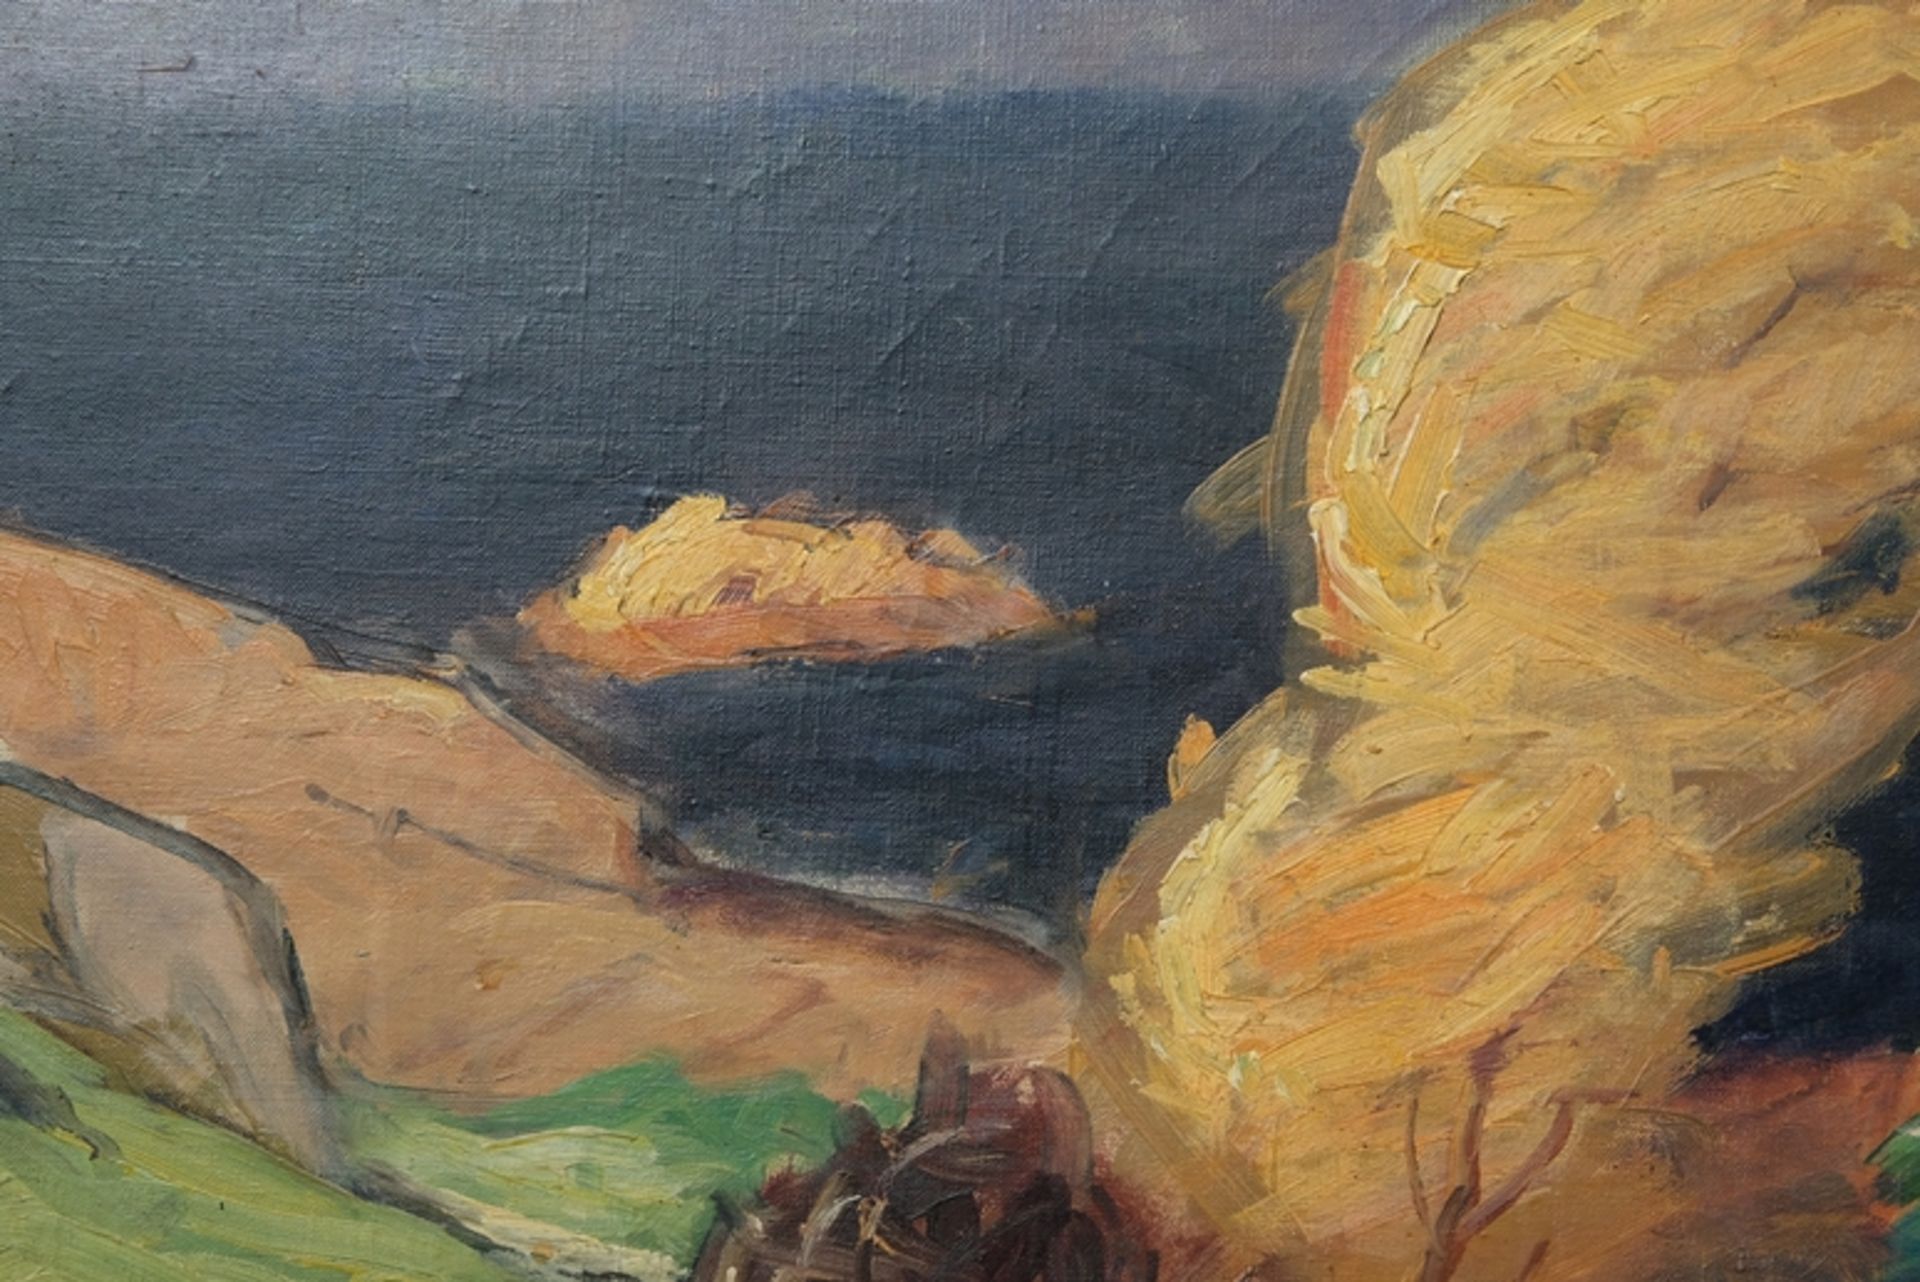 Aabo, Jens (1898-unknown), Bornholm, 1936, oil on canvas. - Image 4 of 5